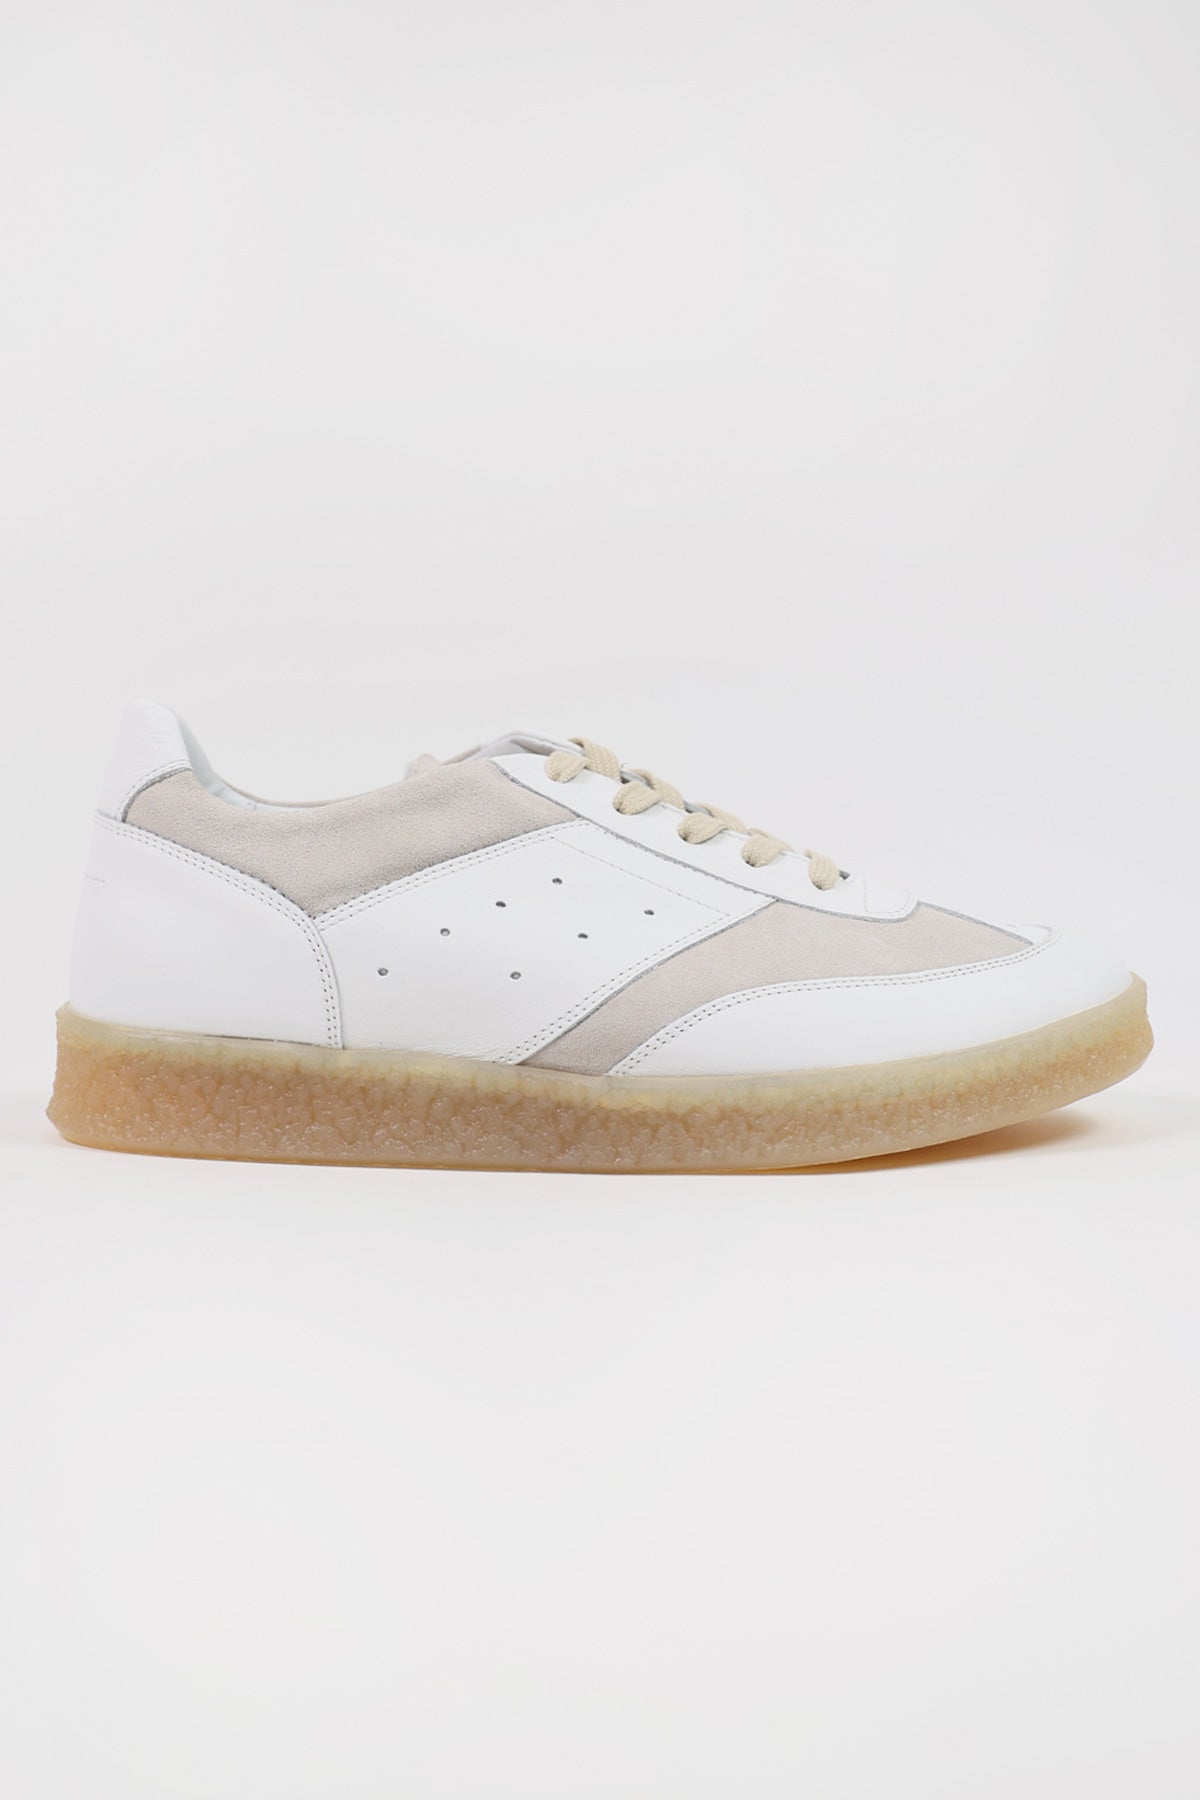 MM6 Maison Margiela - Leather 6 Court Sneakers - Off-White - Canoe Club